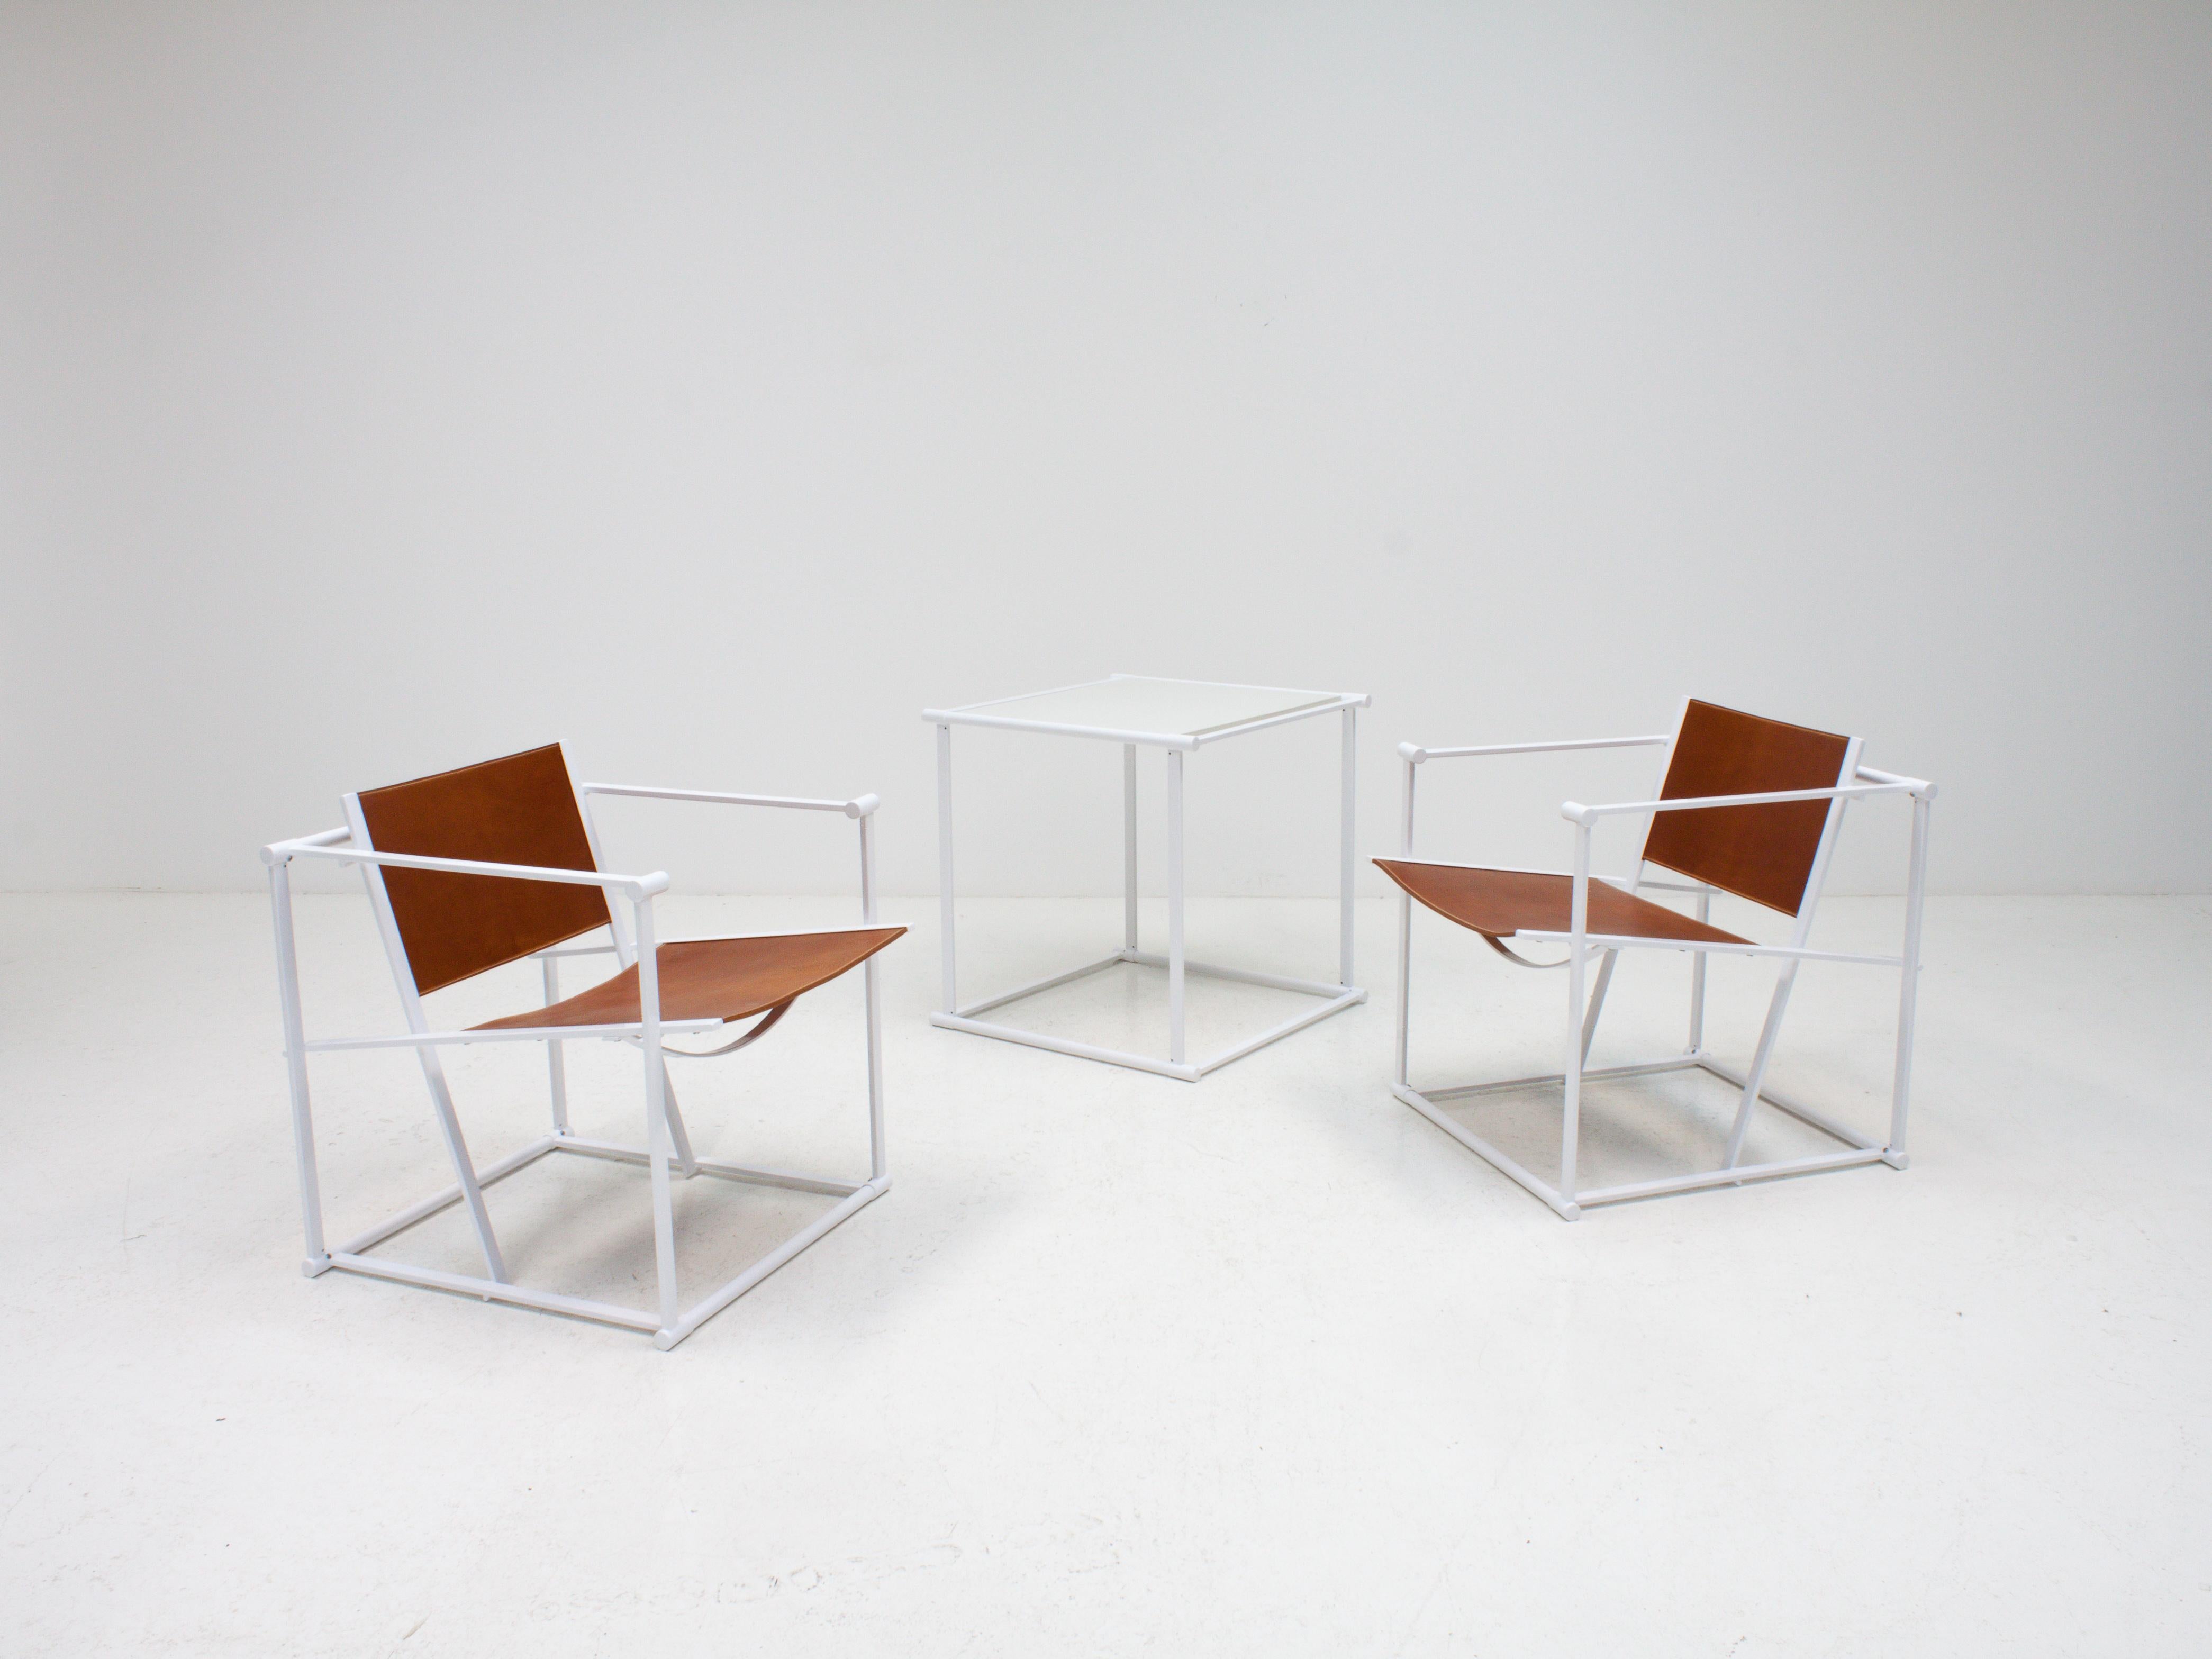 A pair of steel and leather FM62 chairs and table by Radboud Van Beekum for Pastoe, 1980s.

Constructed from geometrically folded steel with leather seating. Inspired by the designs of Gerrit Rietveld and following the traditions of the De Stijl